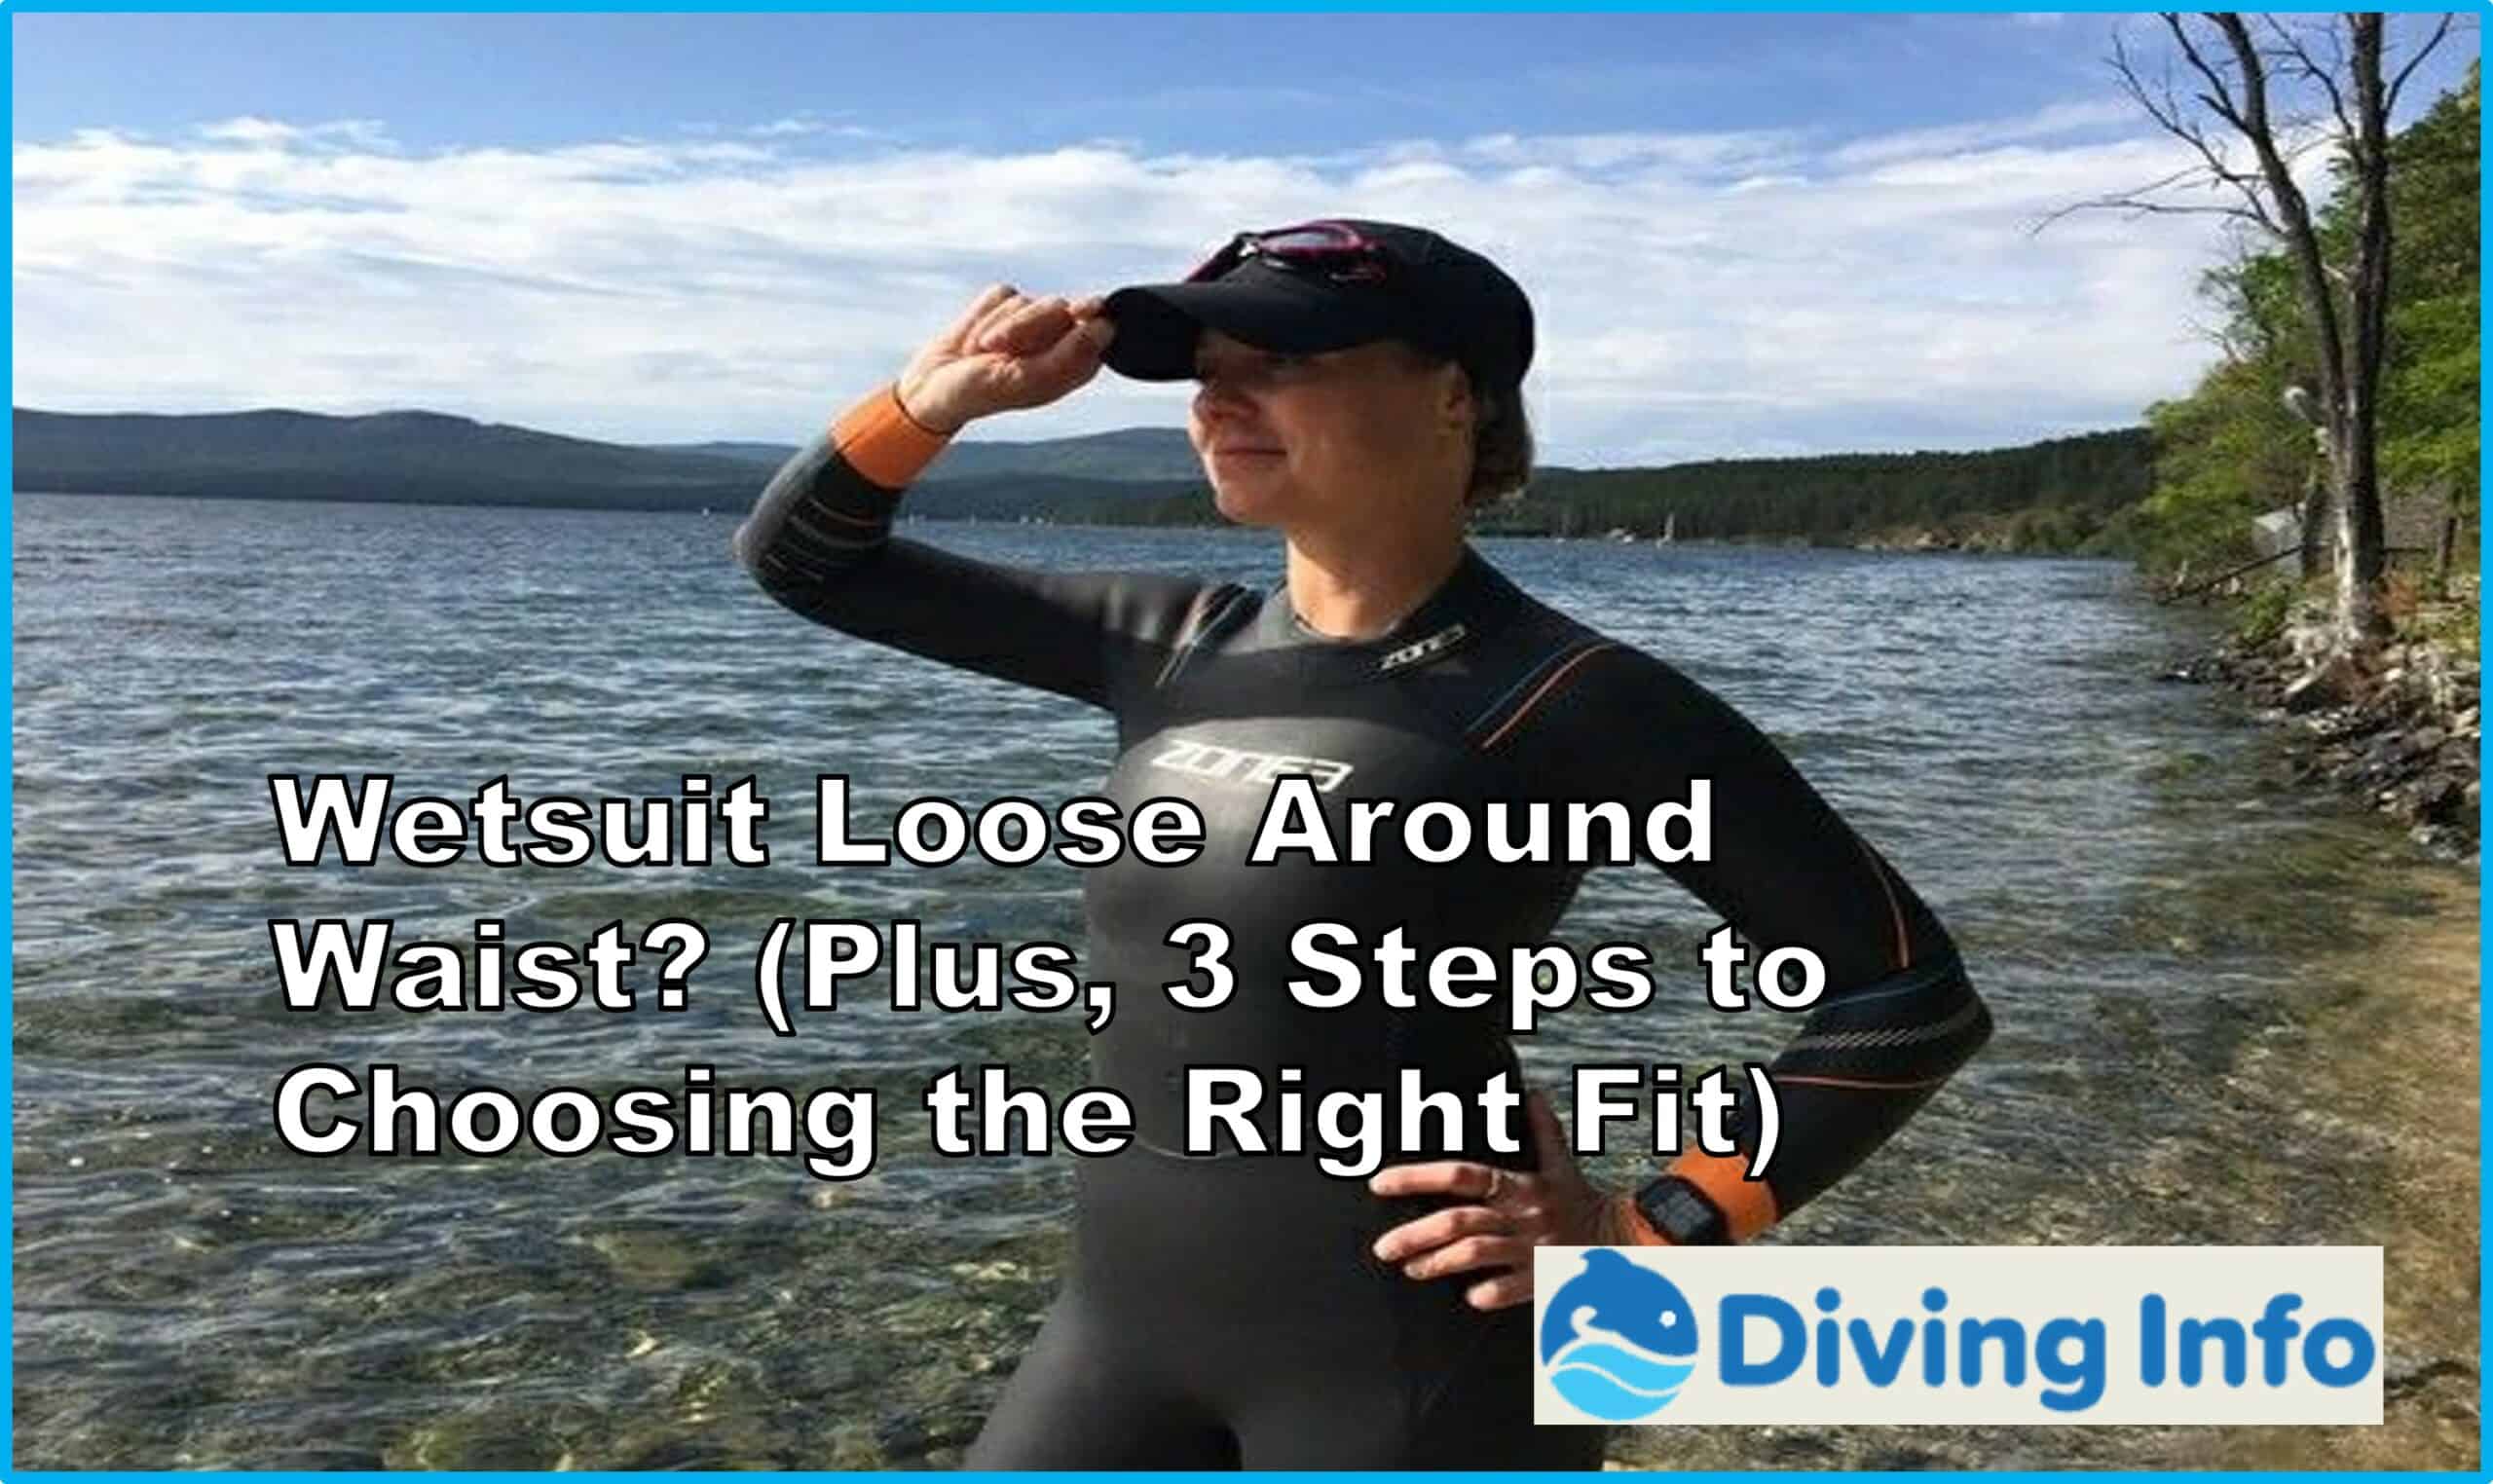 III. Different Types of Wetsuits for Scuba Diving